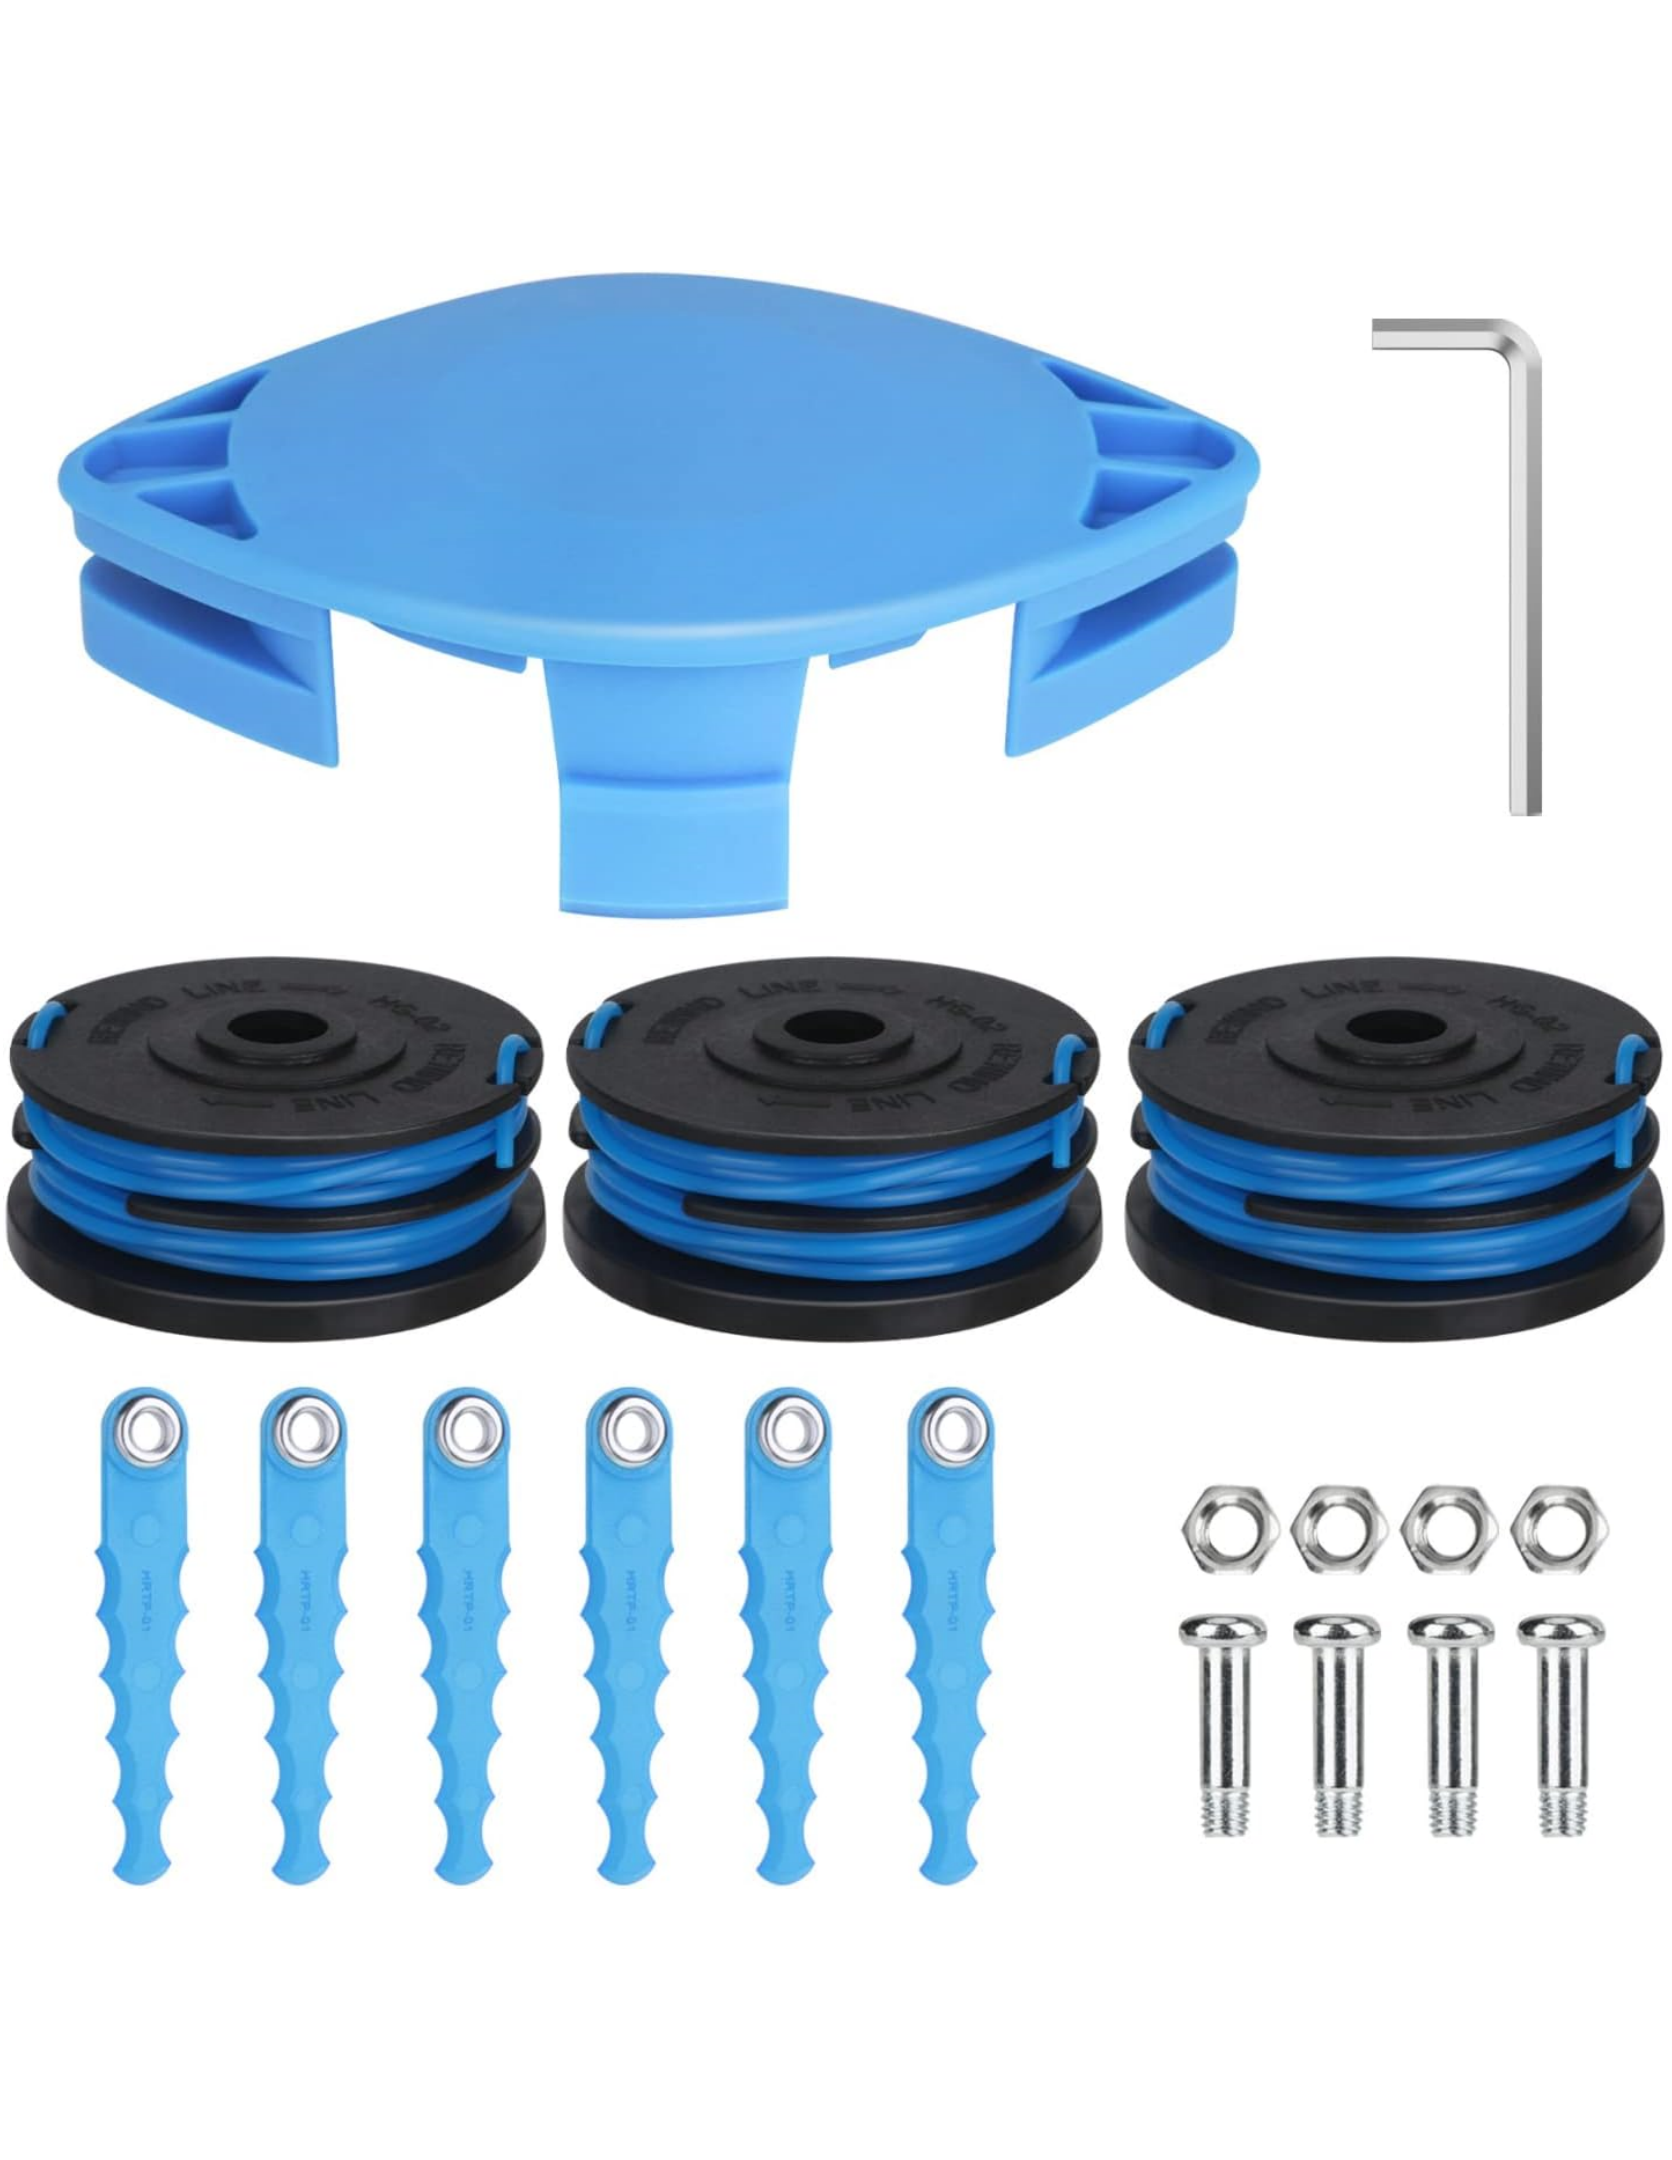 THTEN KST-120X Trimmer Blades Head Replacement Spool 20ft 0.065 inch Compatible with Kobalt KST 120x-06 and 40v Max Cordless String Trimmer 19 Pack